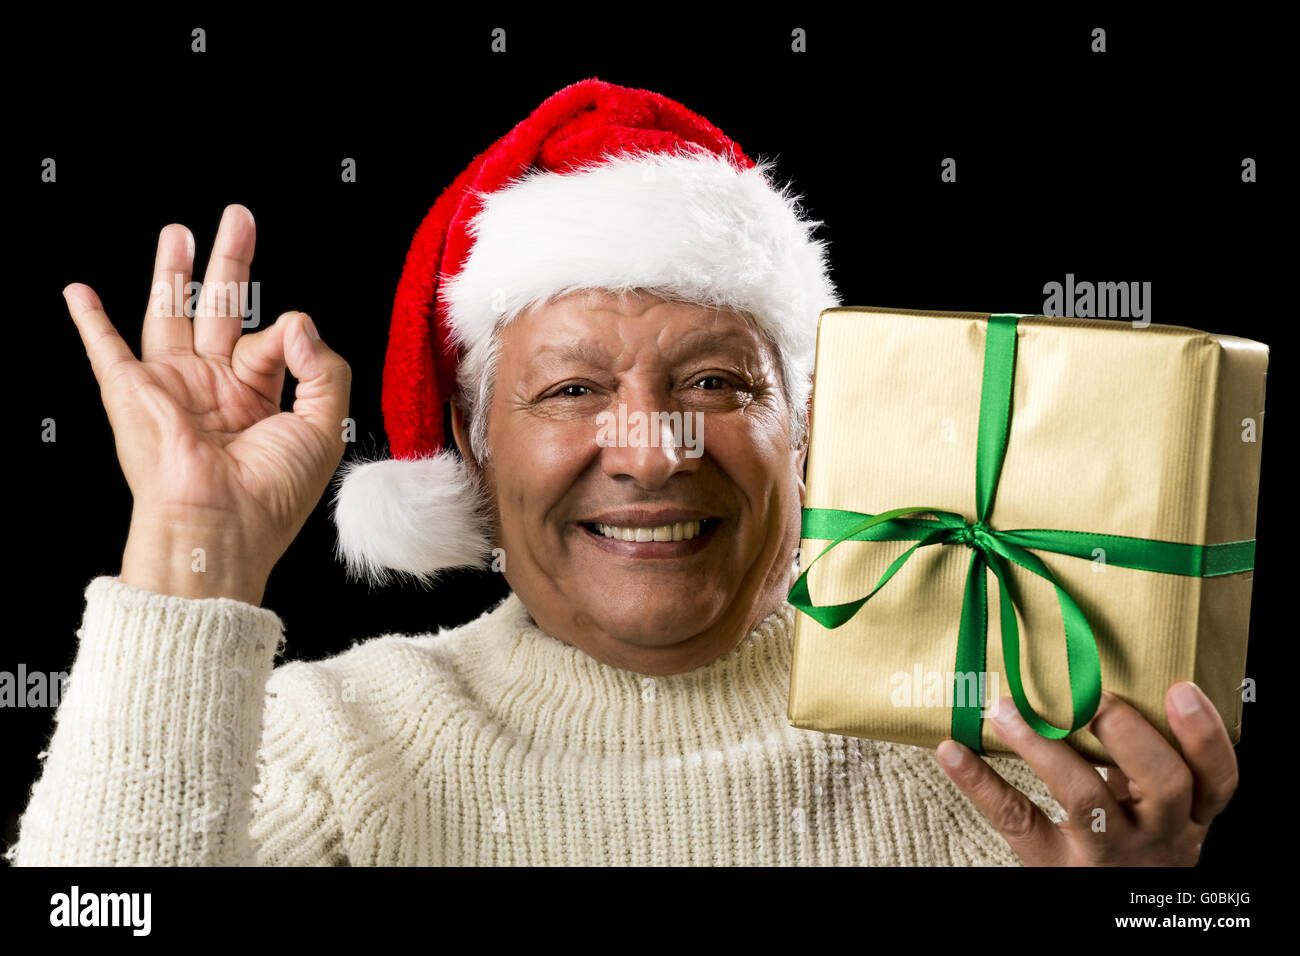 Grinning Male Senior With Gift Gesturing OK Sign Stock Photo